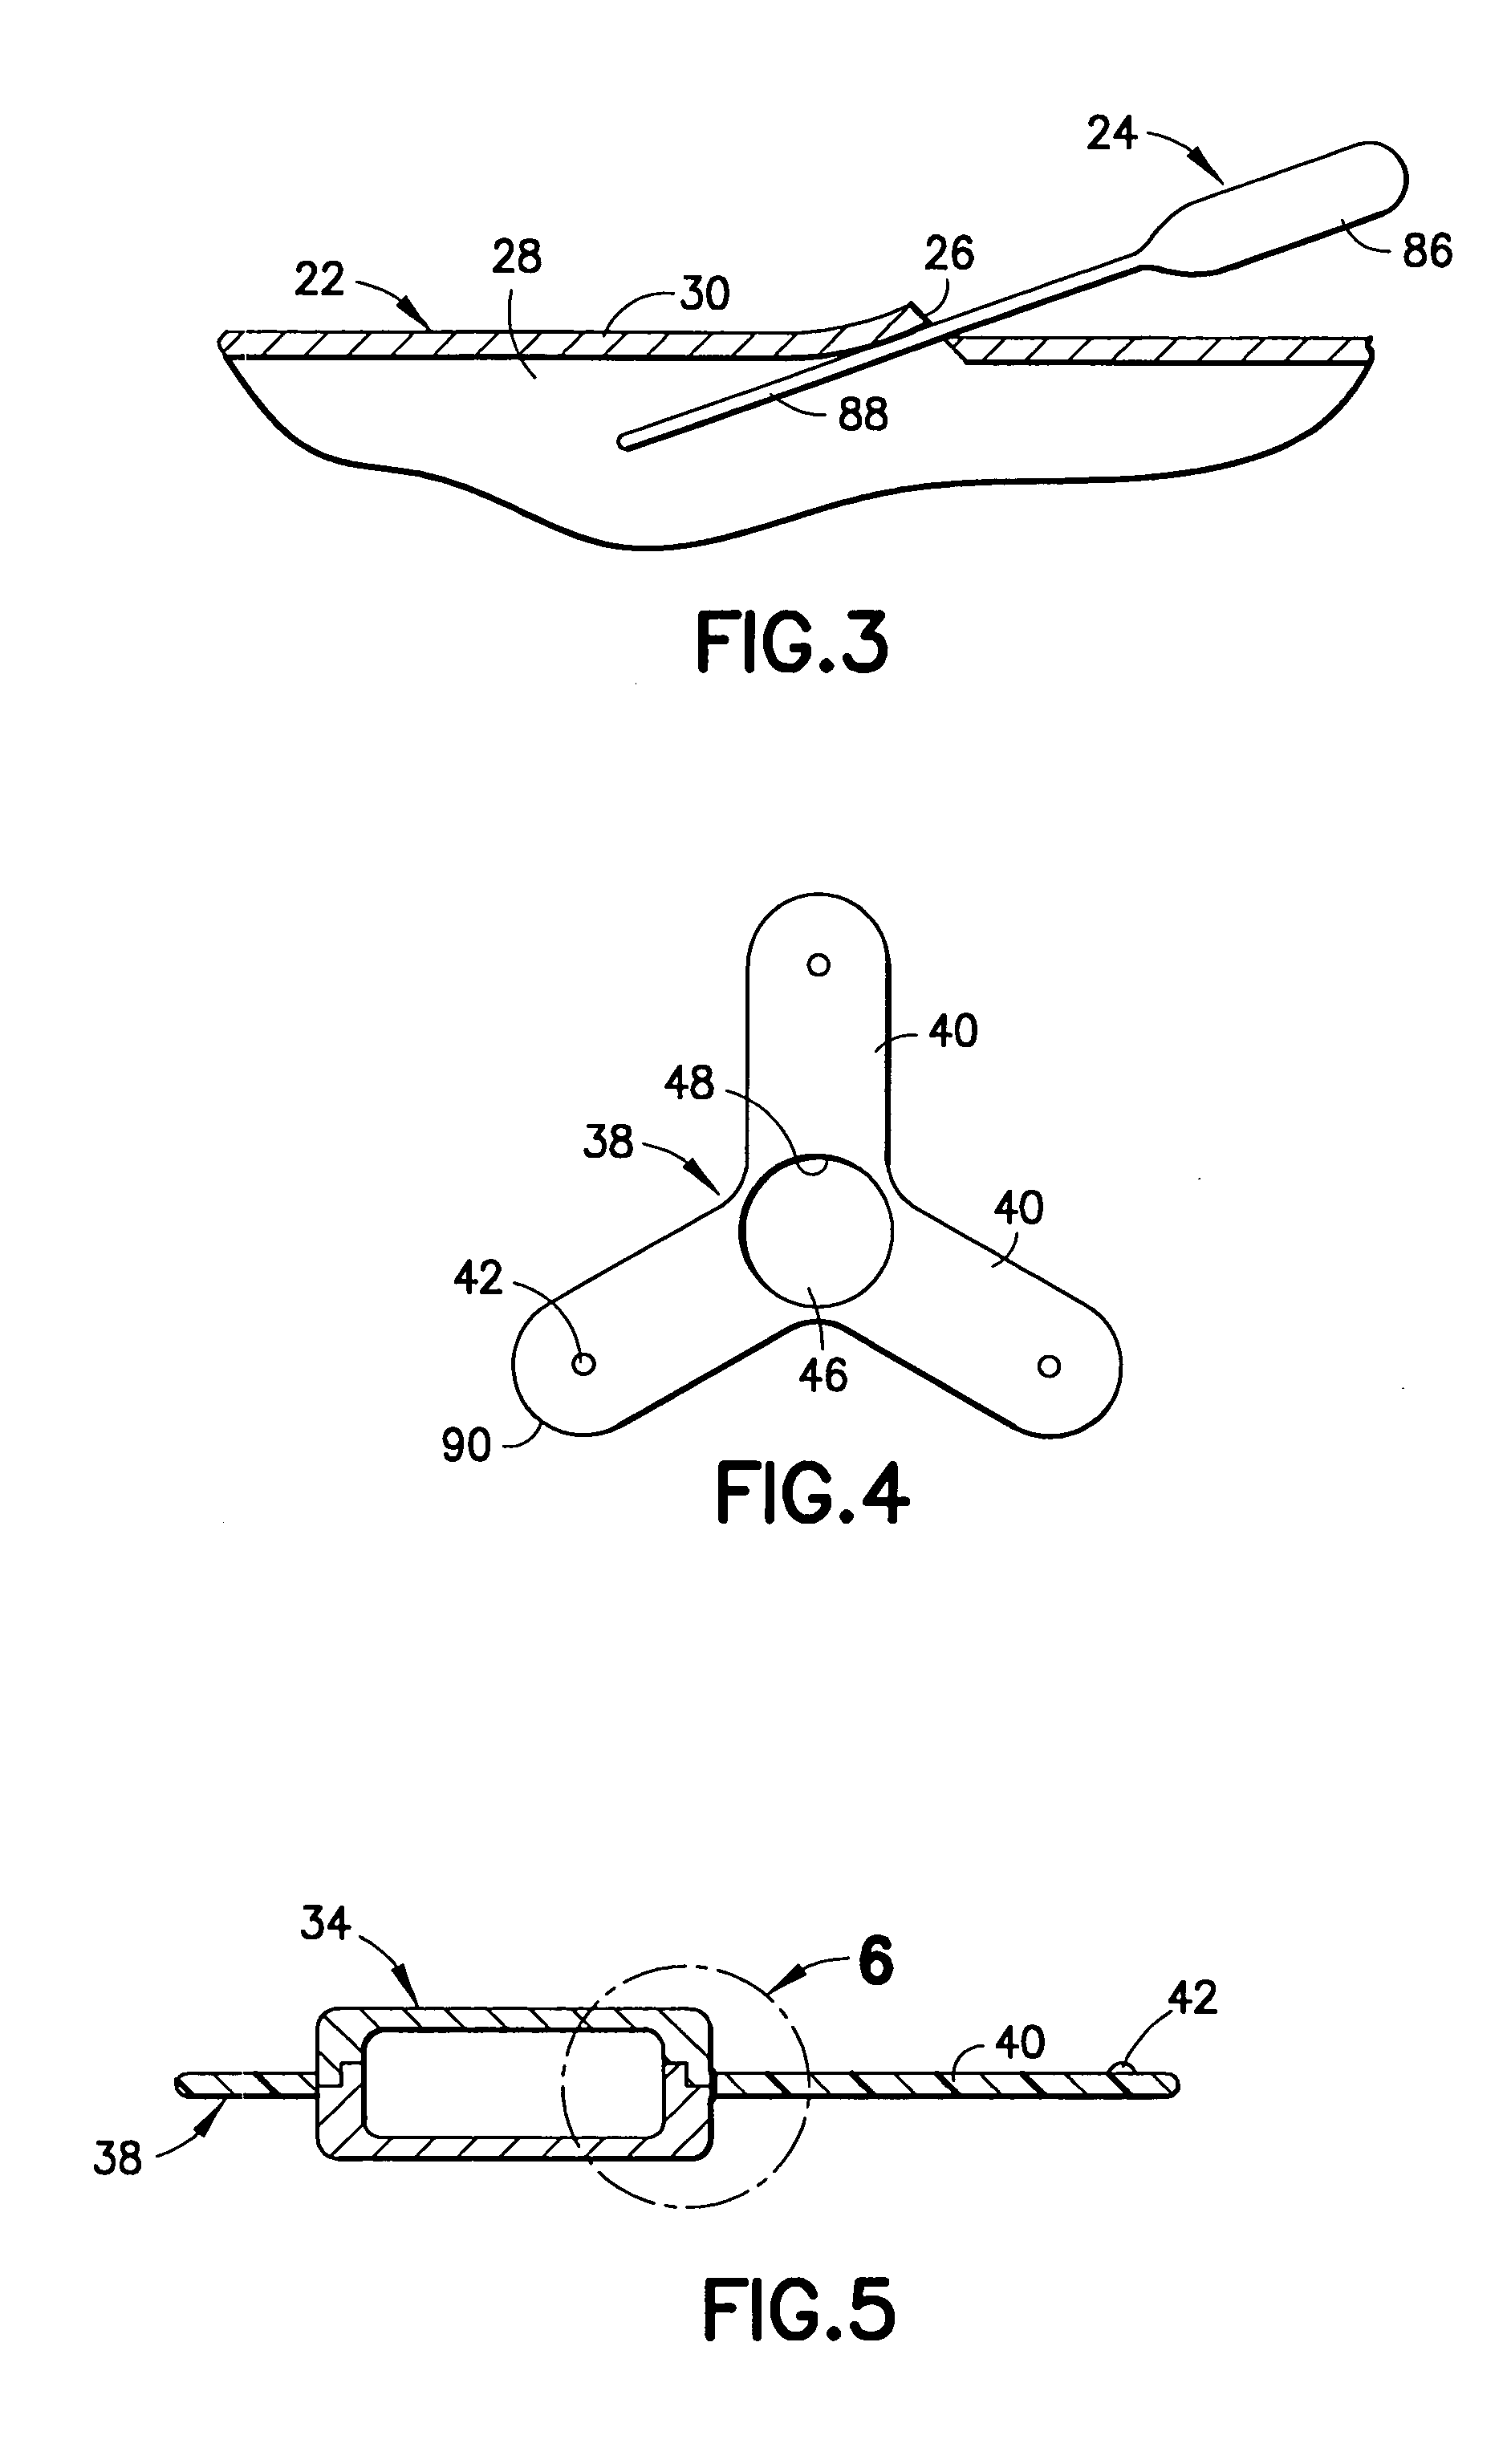 Implantable leadless cardiac device with flexible flaps for sensing